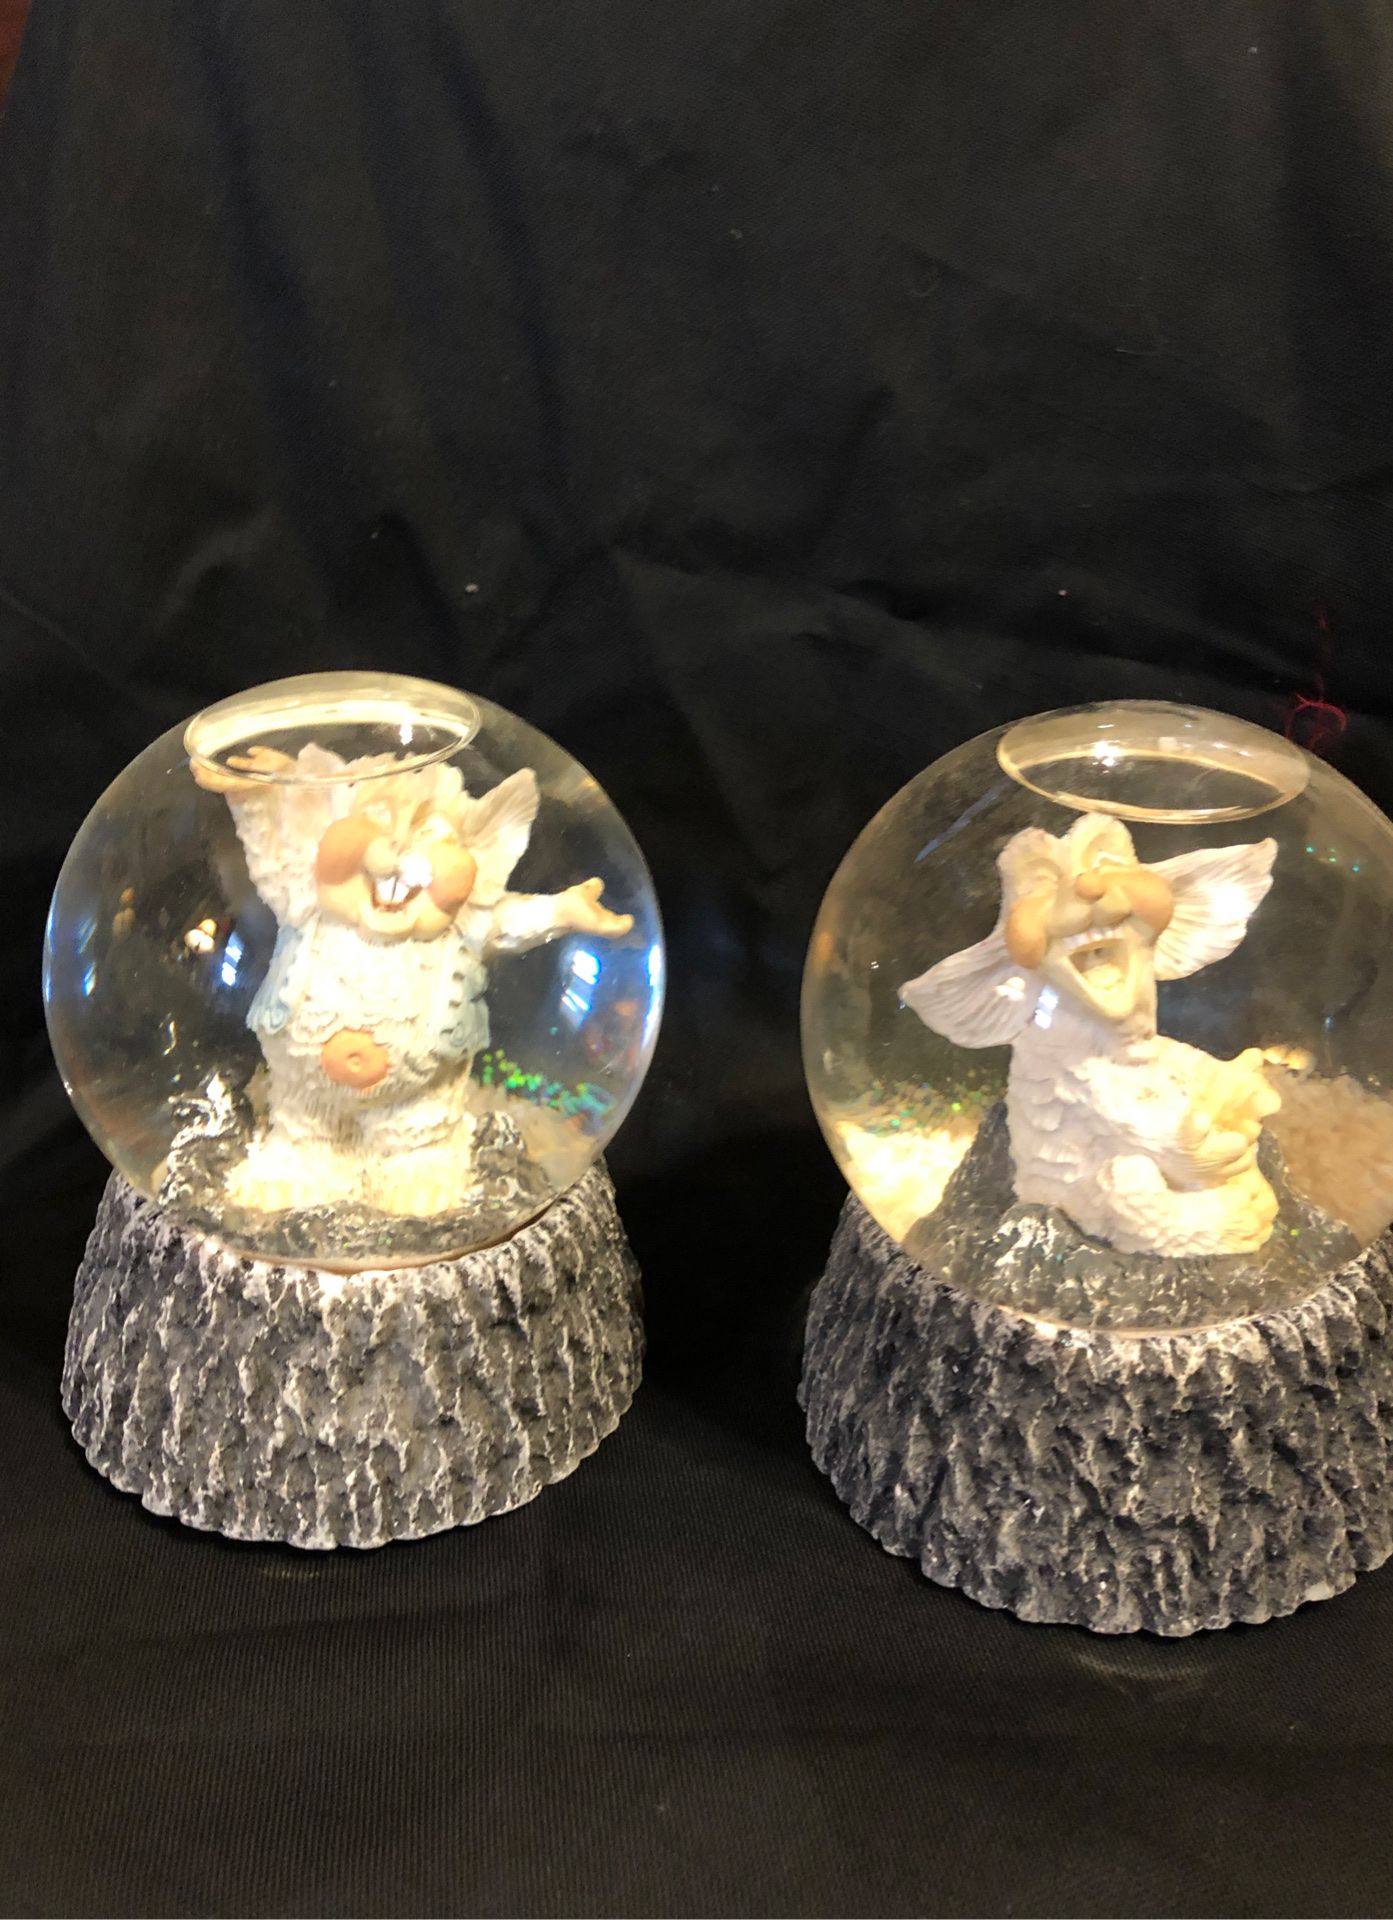 Krystonians puffles and triumph water globes